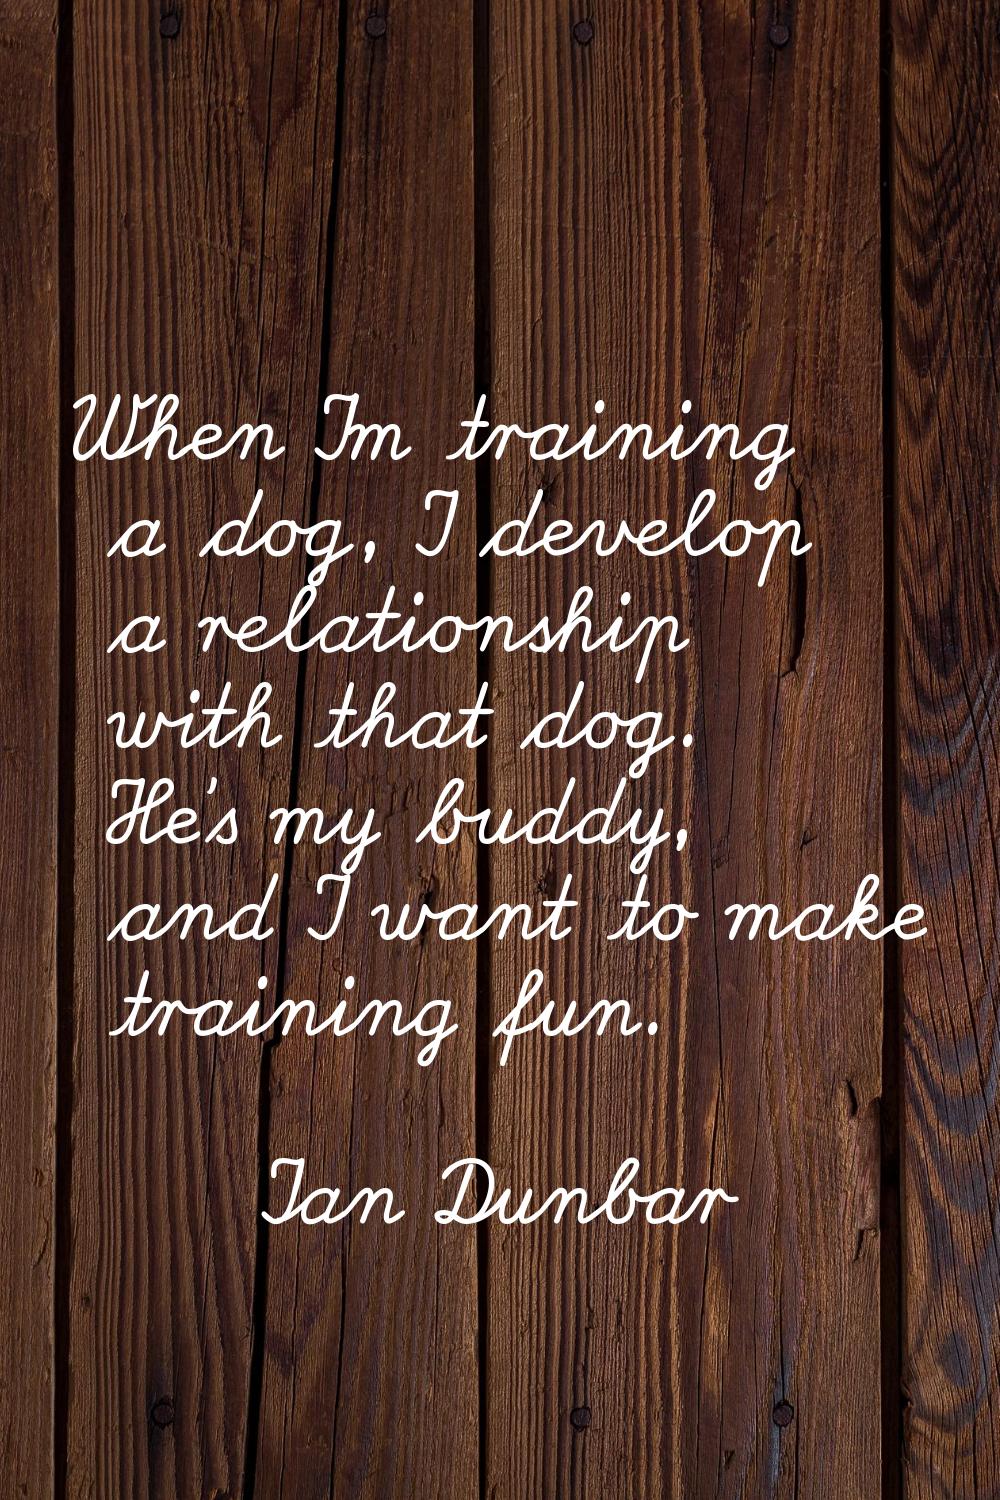 When I'm training a dog, I develop a relationship with that dog. He's my buddy, and I want to make 